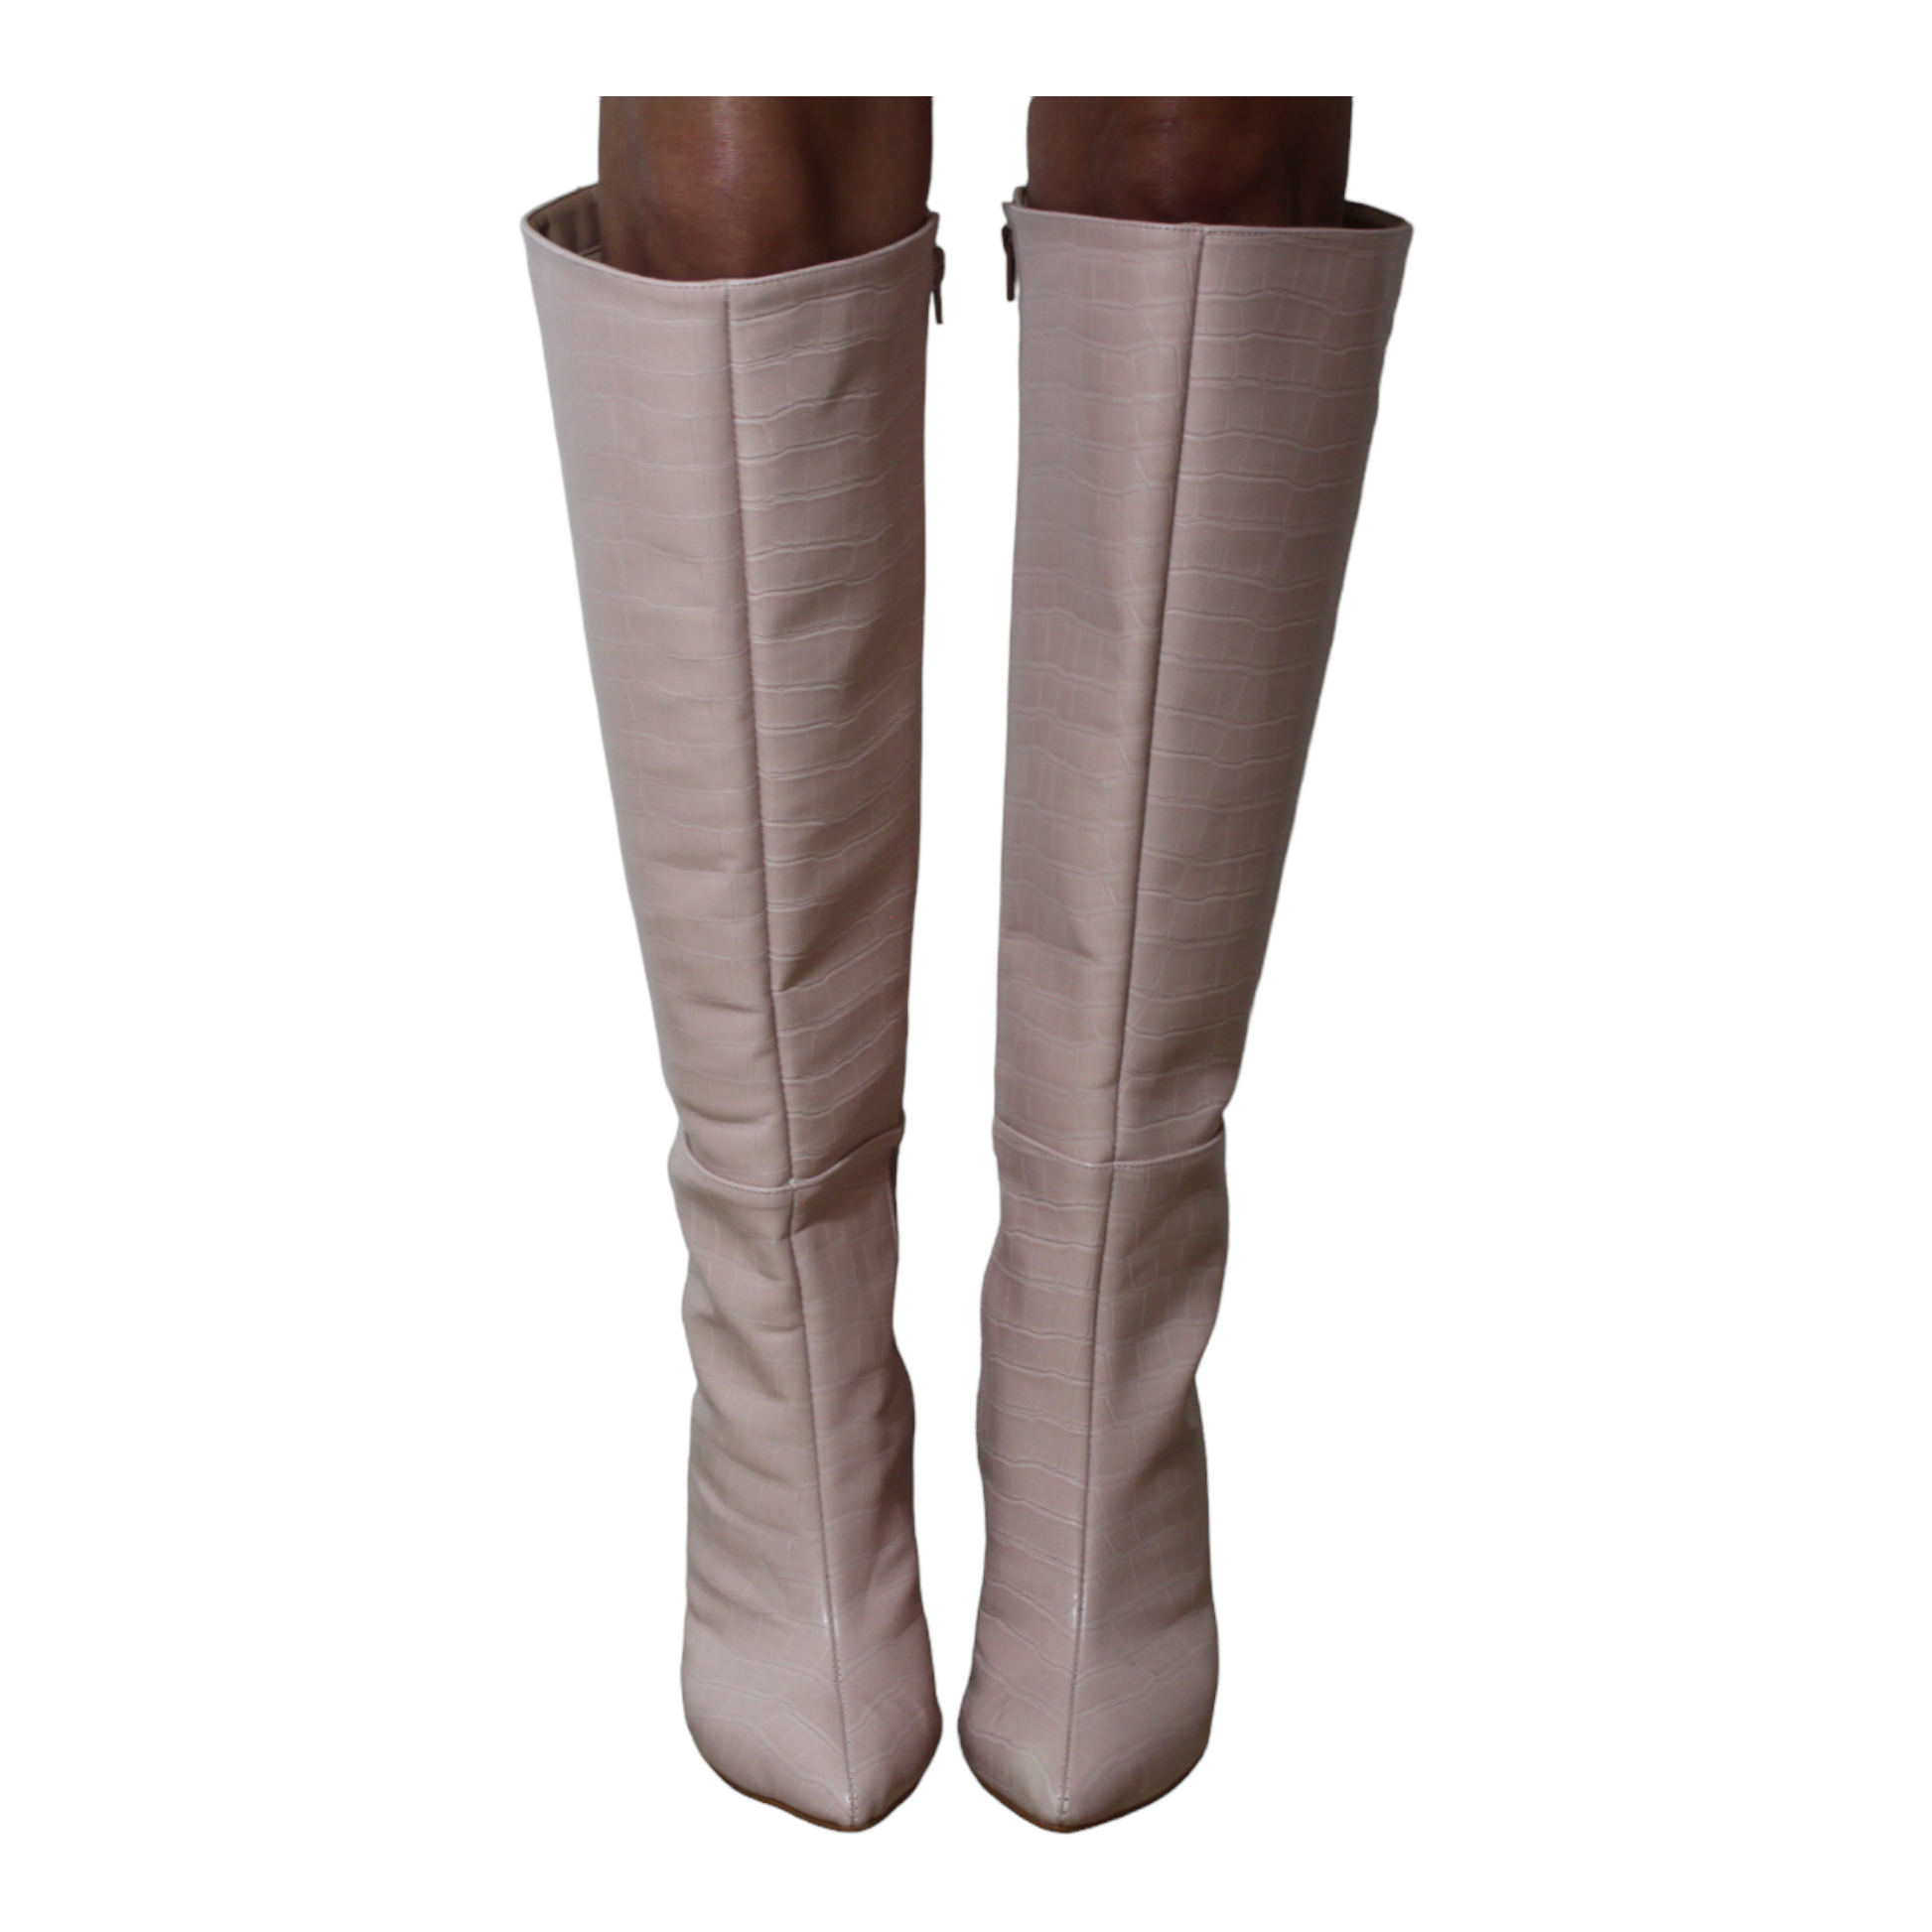 Croc Embossed Faux Leather Knee High Pointed Boots - Julia & Santos 